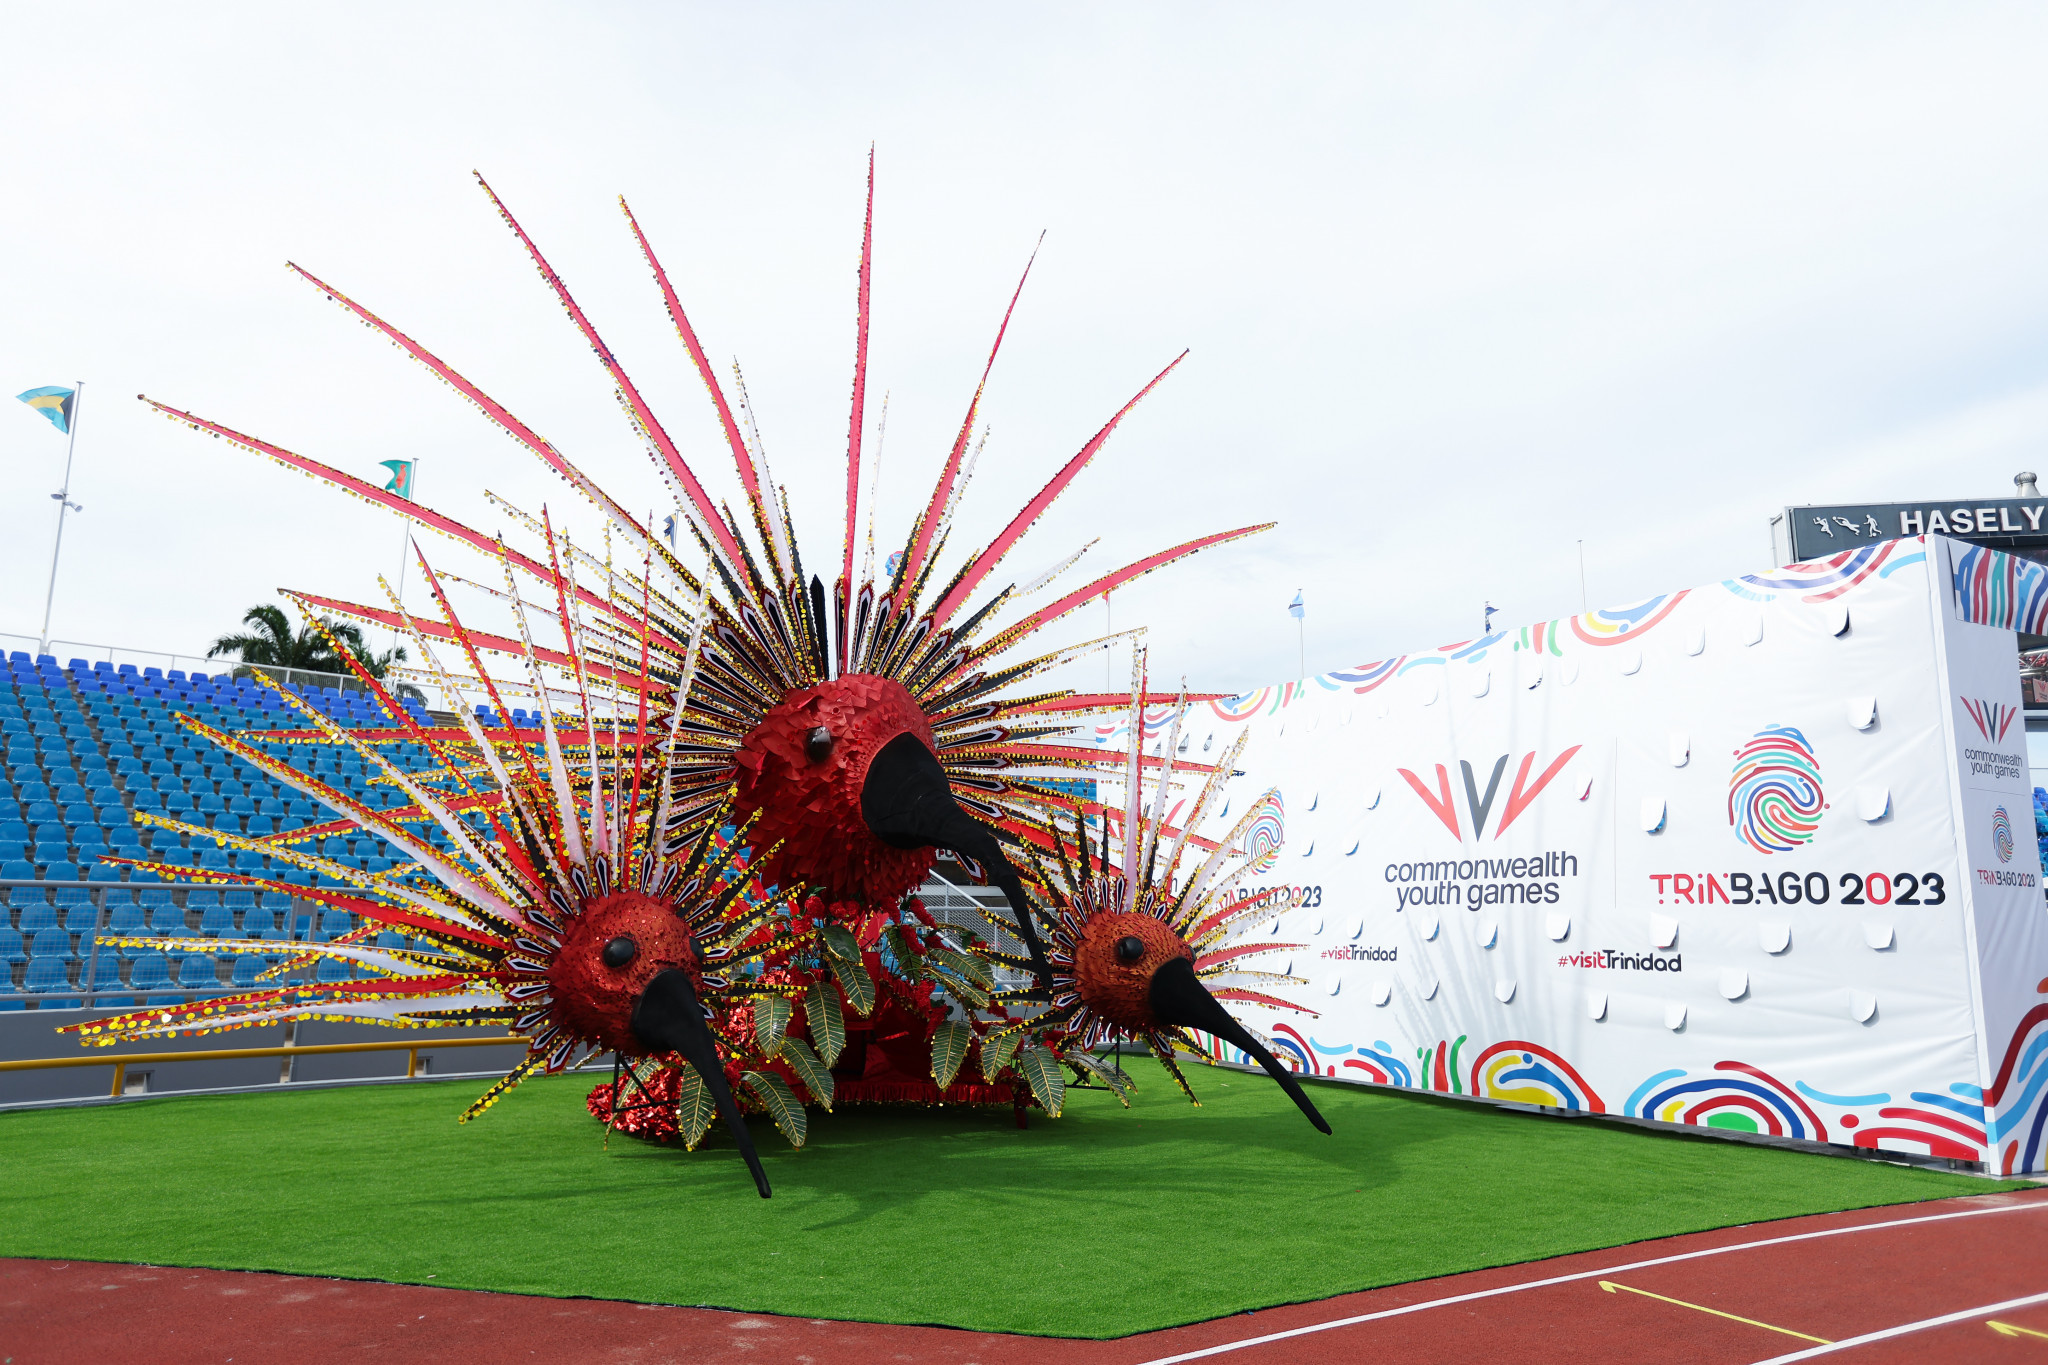 The carnival was a key theme of the Trinbago 2023 Opening Ceremony ©Getty Images